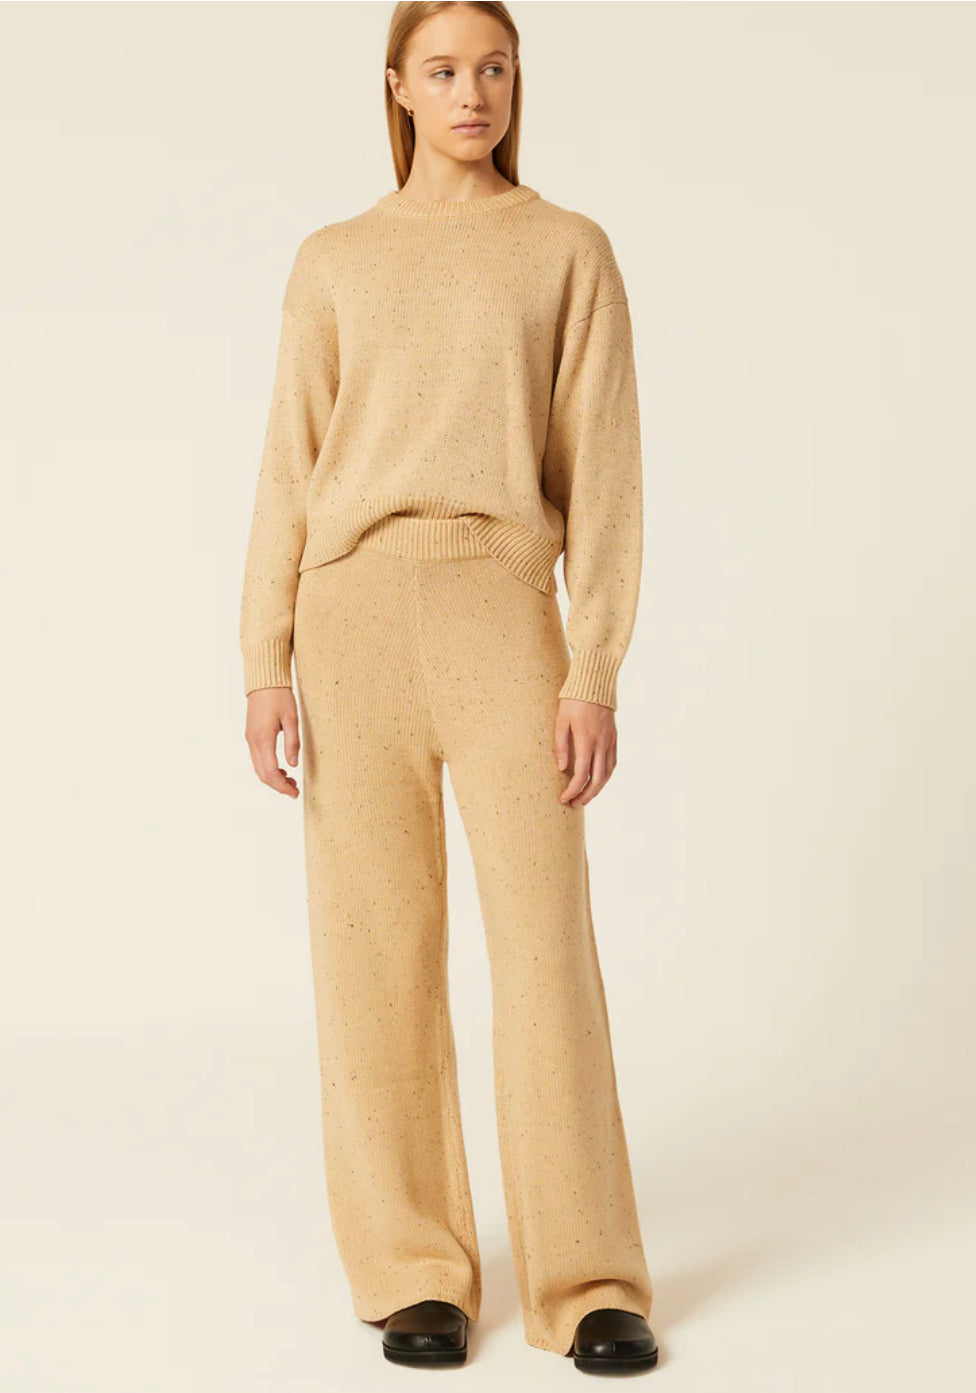 Nude Lucy Yuri Speckle Knit Pant